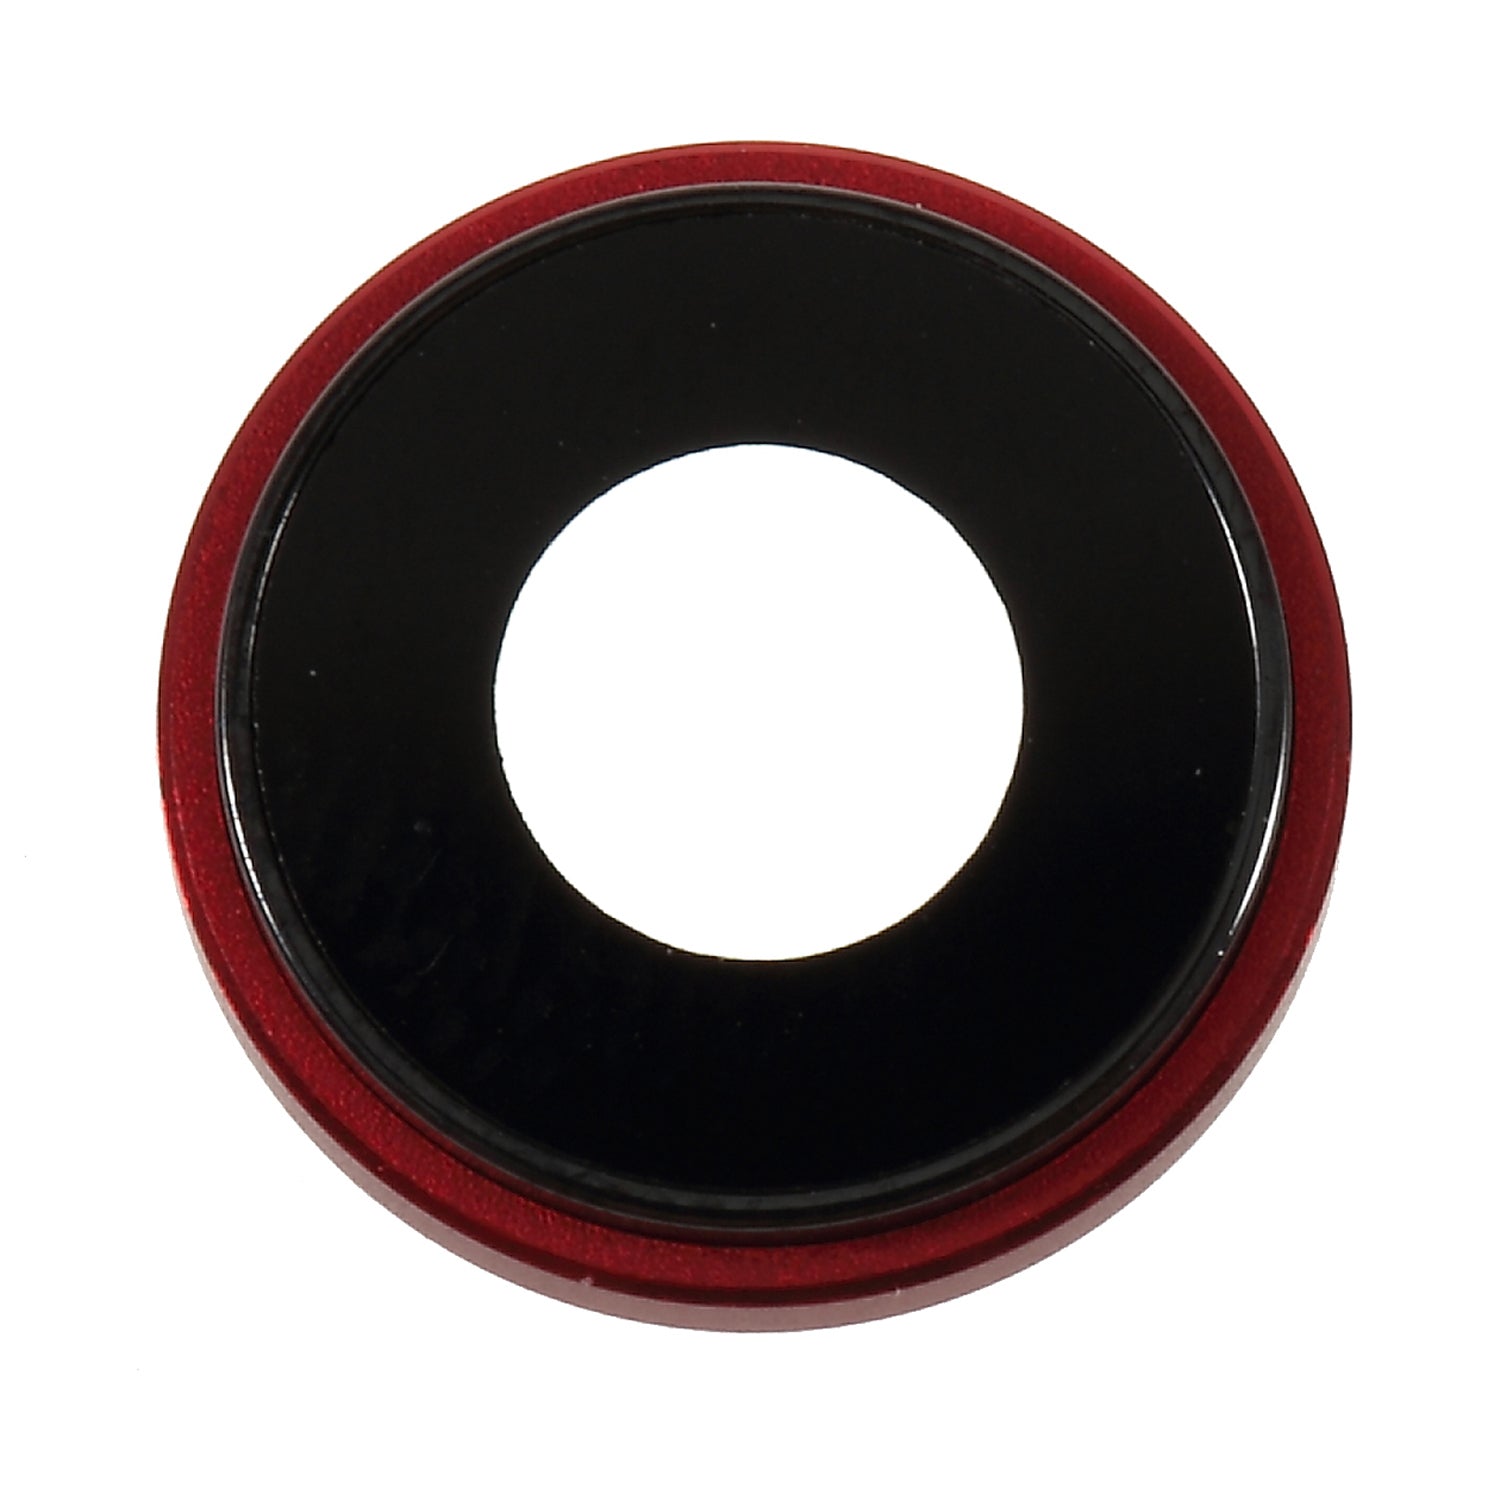 Rear Camera Lens Ring Cover with Glass Lens for iPhone XR 6.1 inch - Red